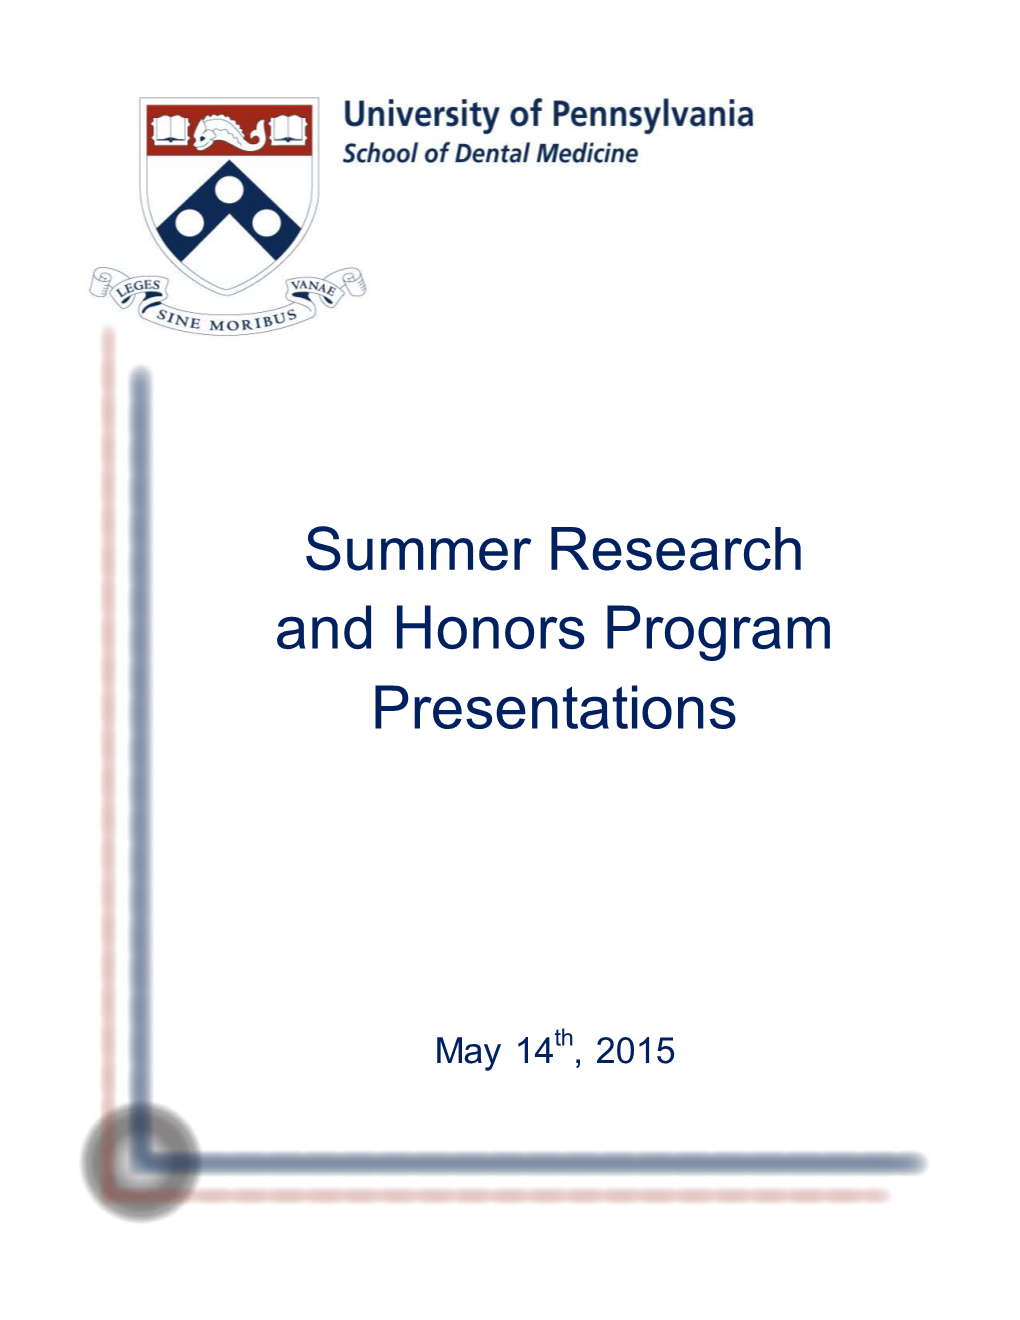 Summer Research and Honors Program Presentations